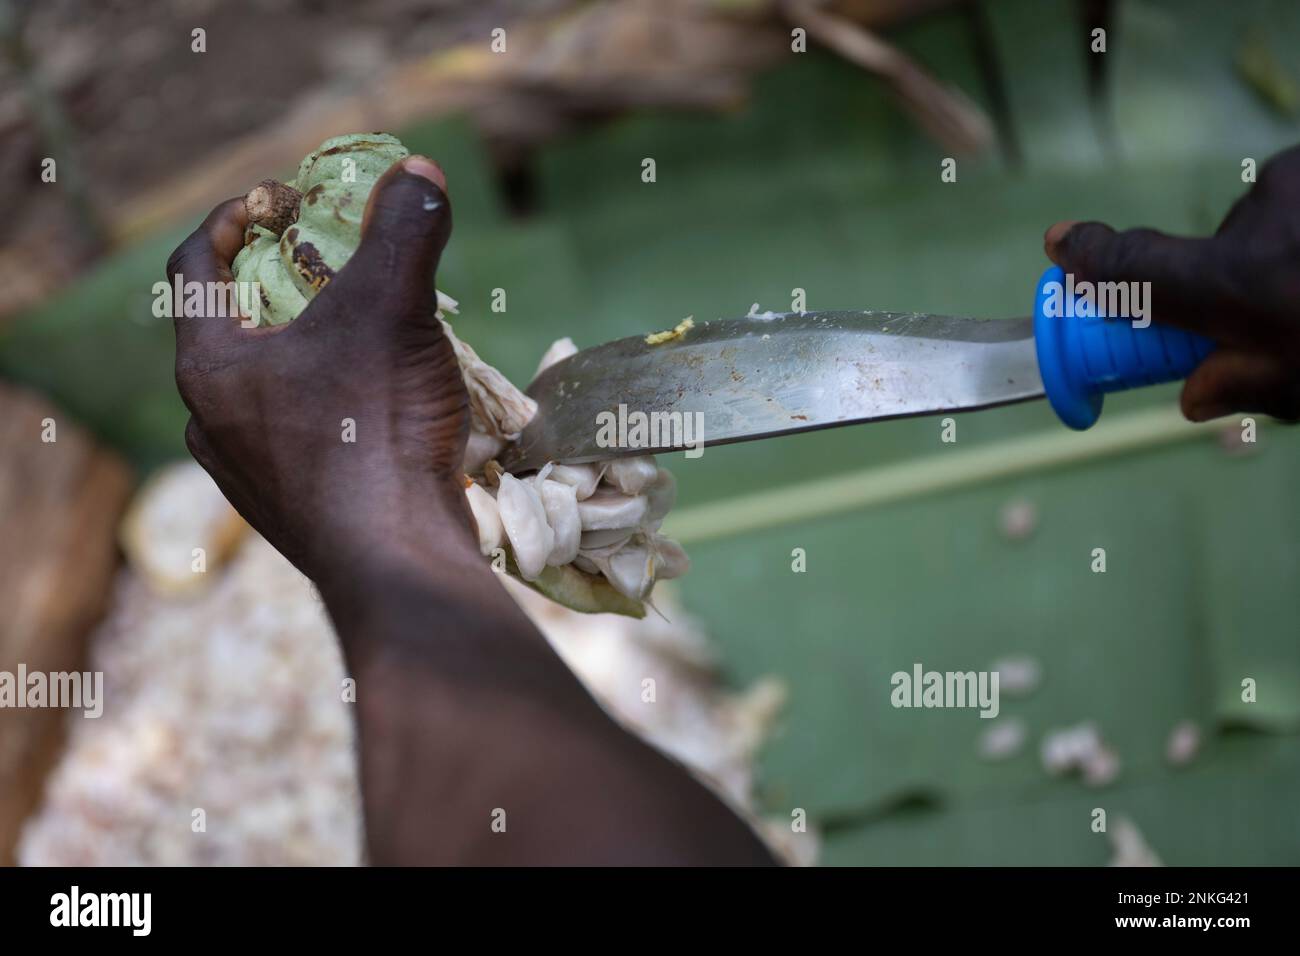 Agboville, Ivory Coast. 23rd Feb, 2023. A farmer separates cocoa beans from a cocoa pod on a cocoa plantation. Federal Minister of Labor Heil and Federal Minister for Economic Cooperation and Development Schulze visit Ghana and Côte d'Ivoire. Credit: Christophe Gateau/dpa/Alamy Live News Stock Photo